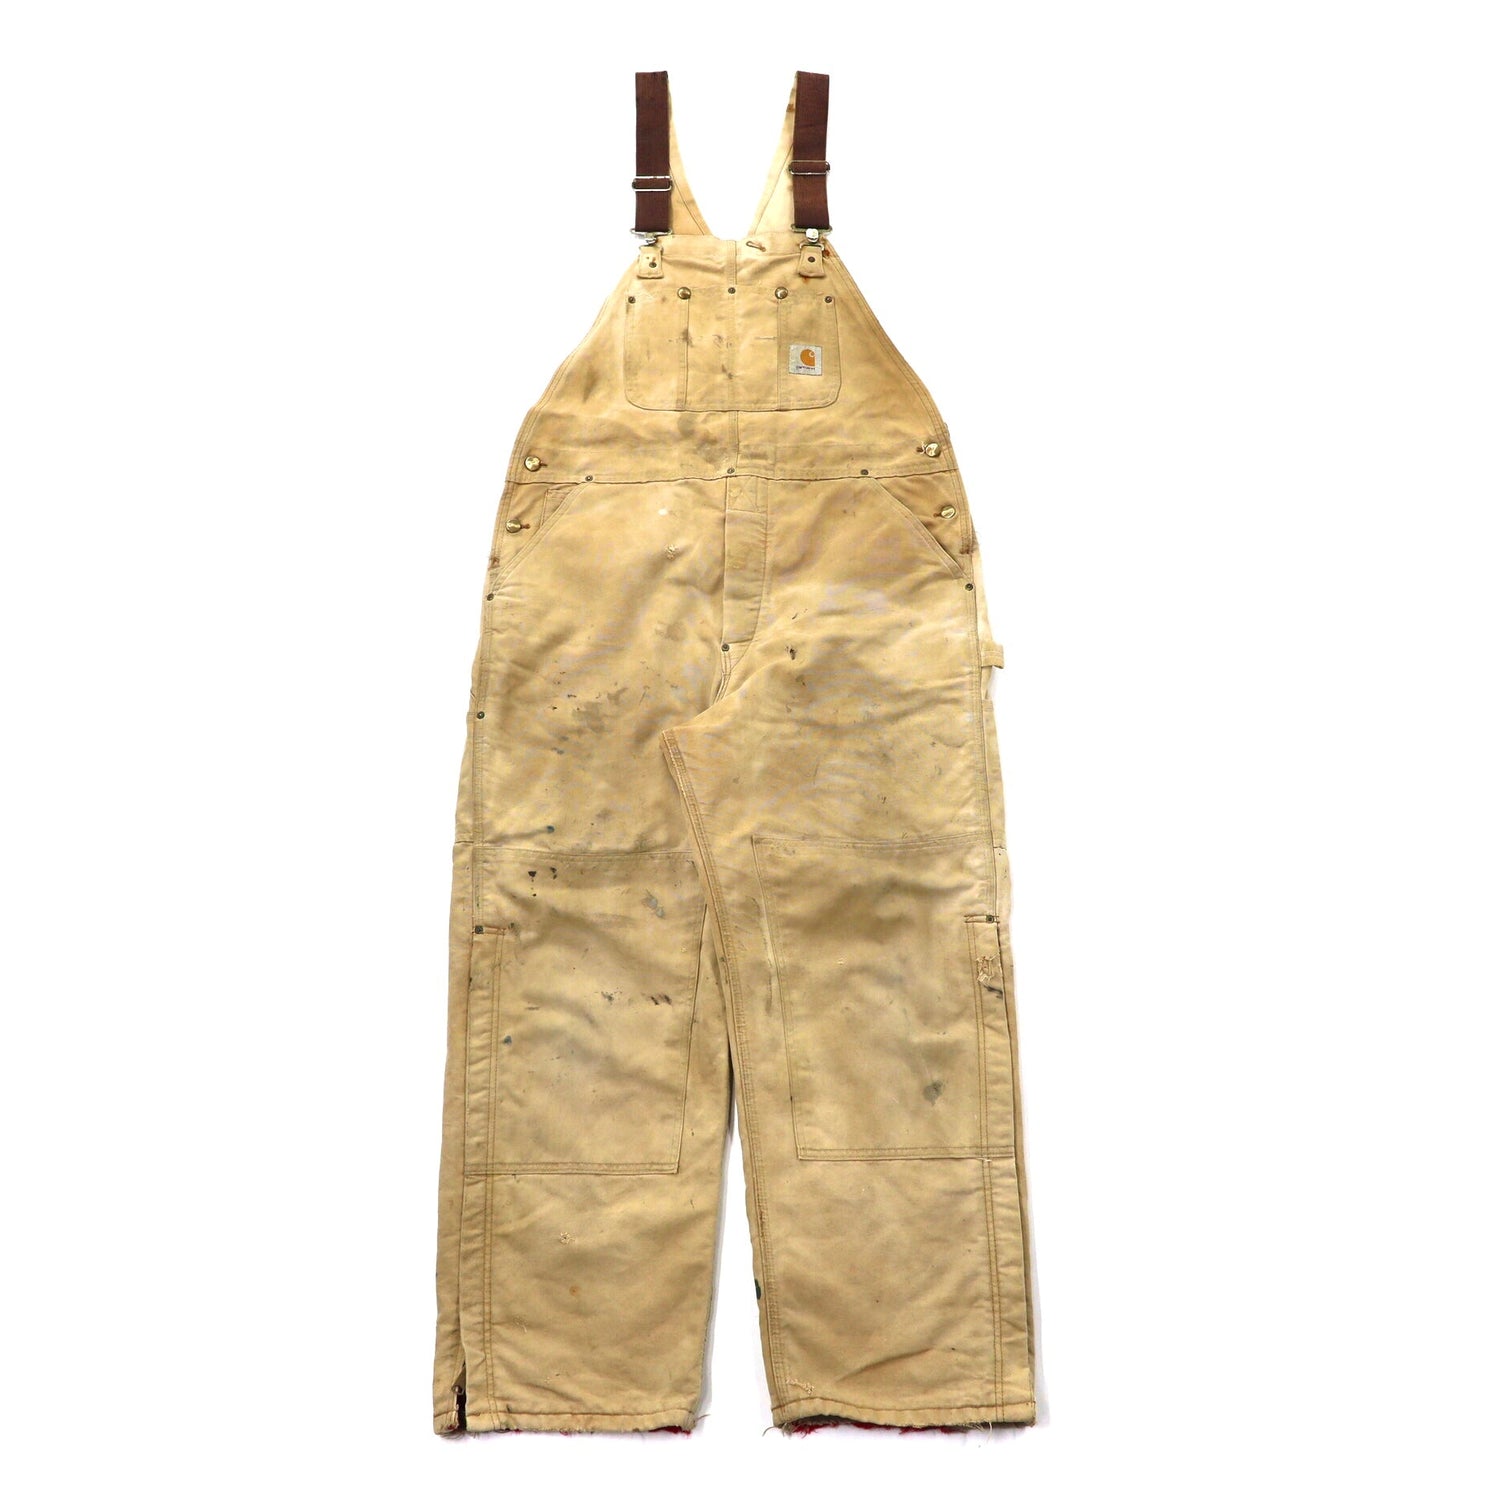 CARHARTT Double knee Overall 40 Beige Duck Star Tag 80s USA Made 